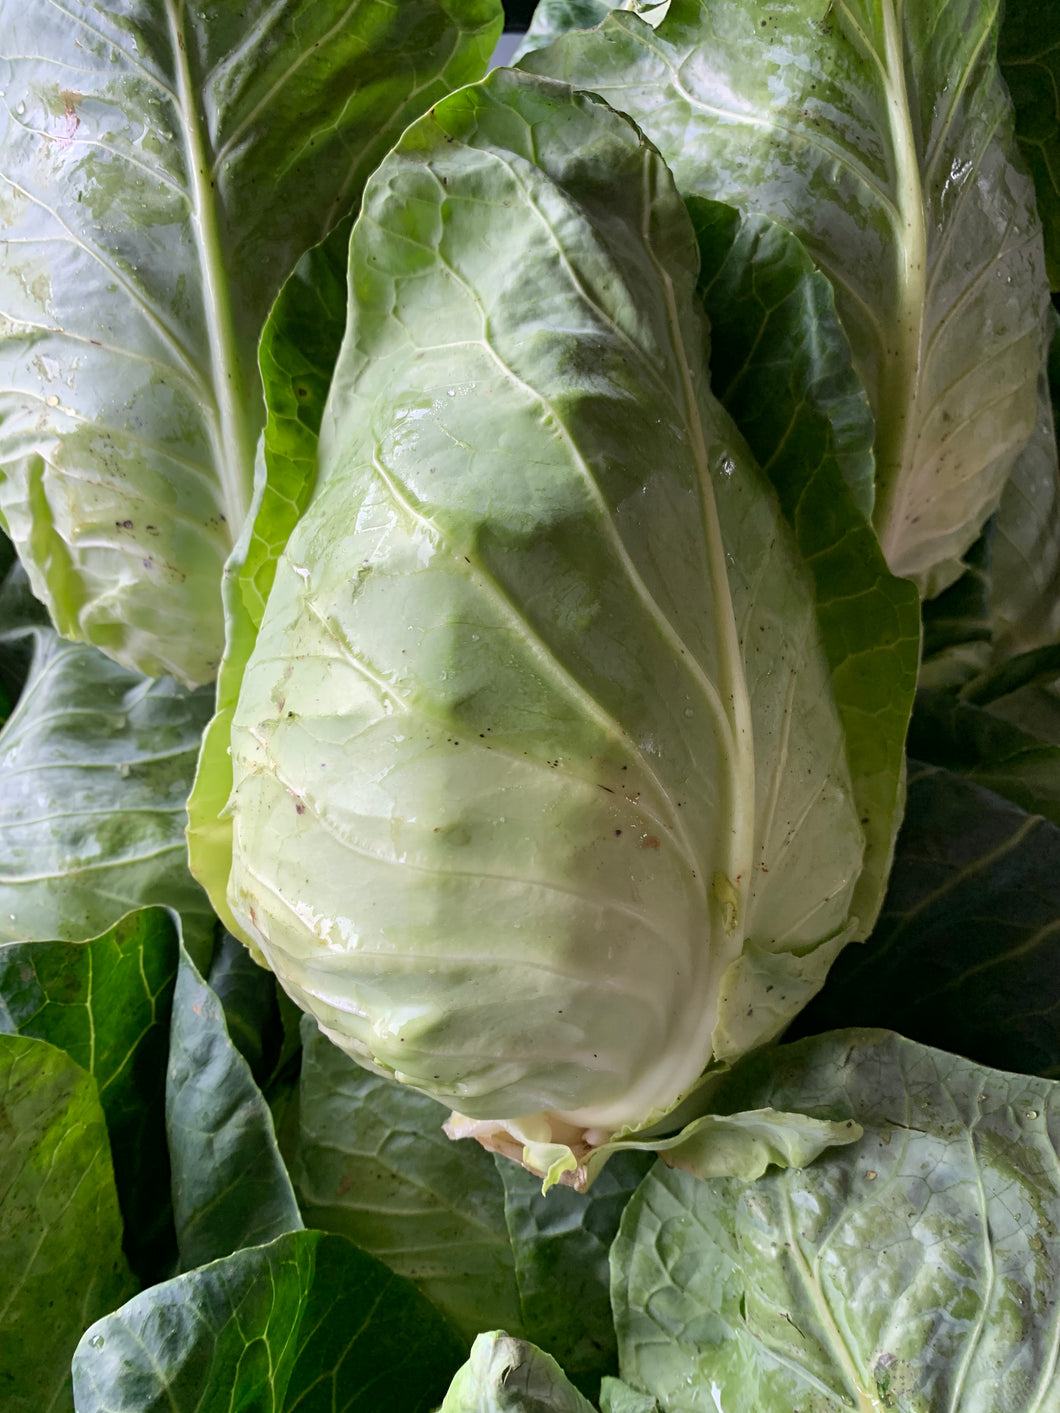 Sweetheart cabbage - Each